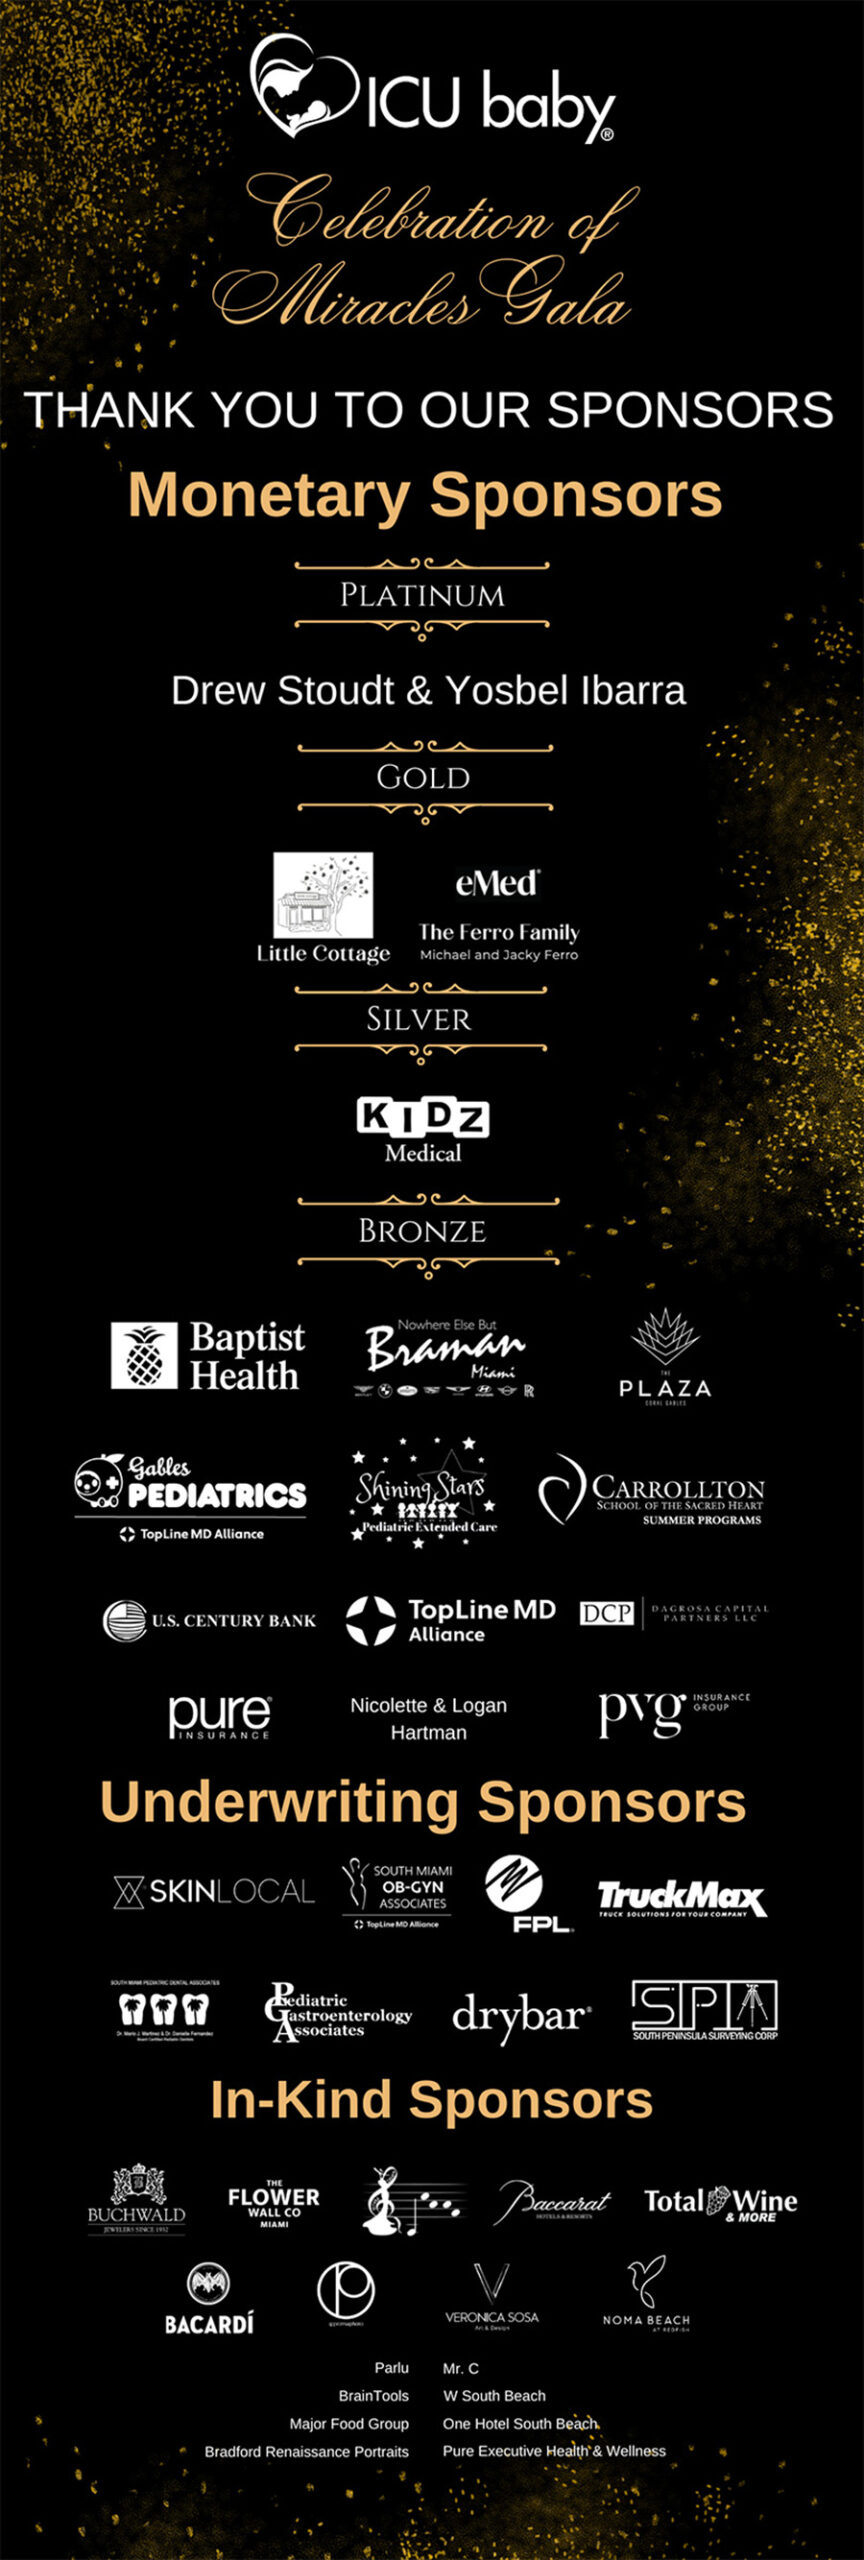 Thank You to Our Celebrations of Miracles Sponsors